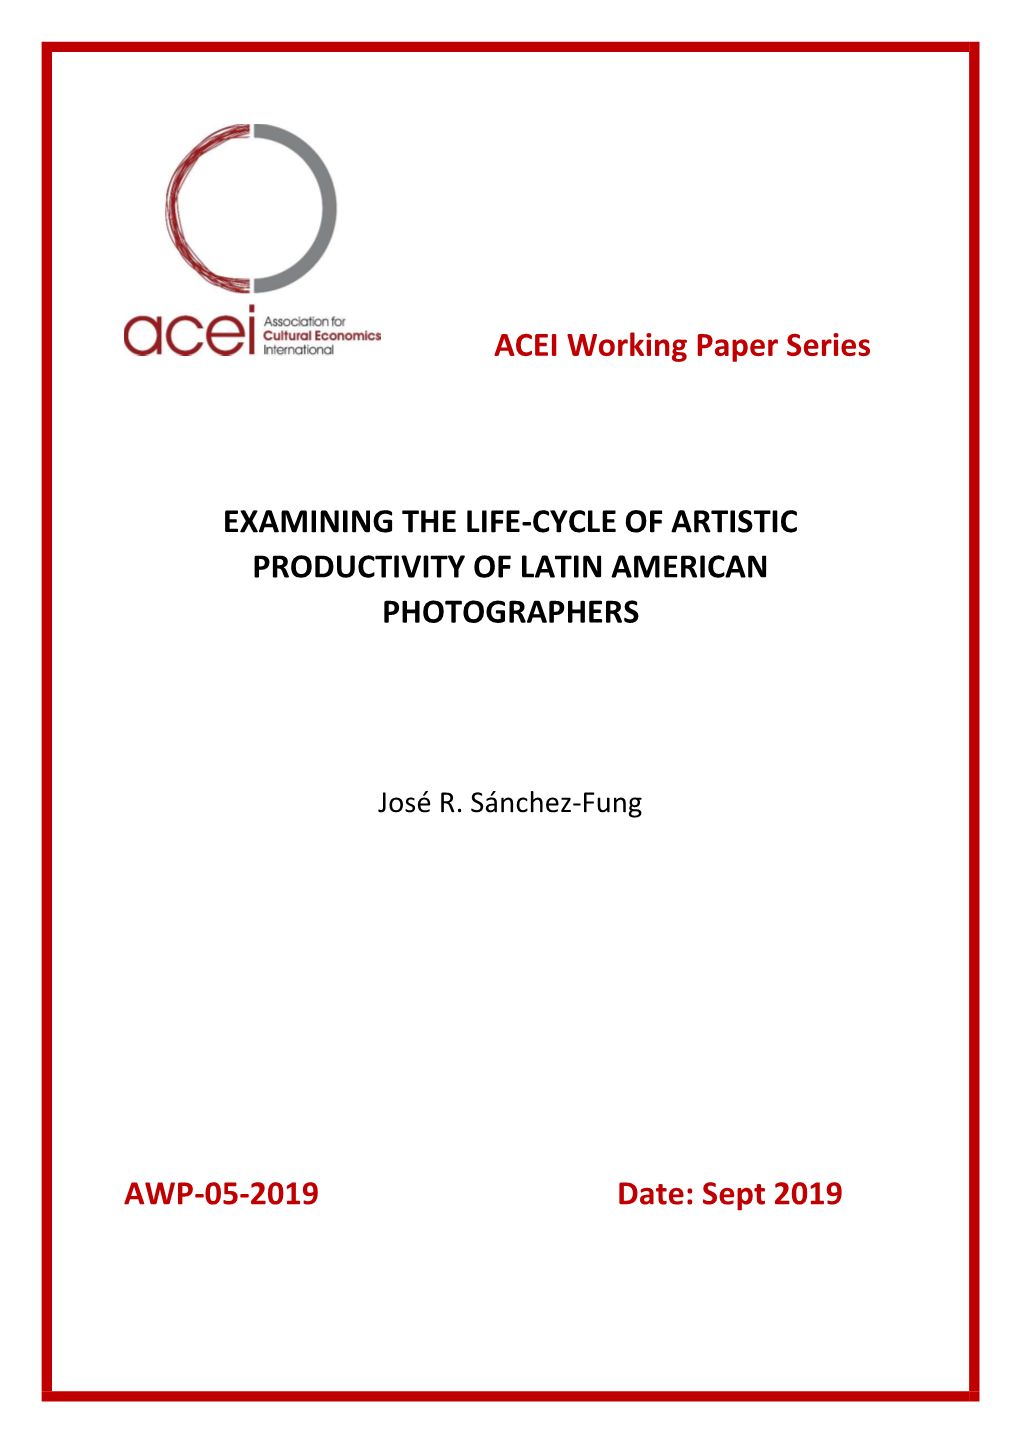 ACEI Working Paper Series EXAMINING the LIFE-CYCLE OF